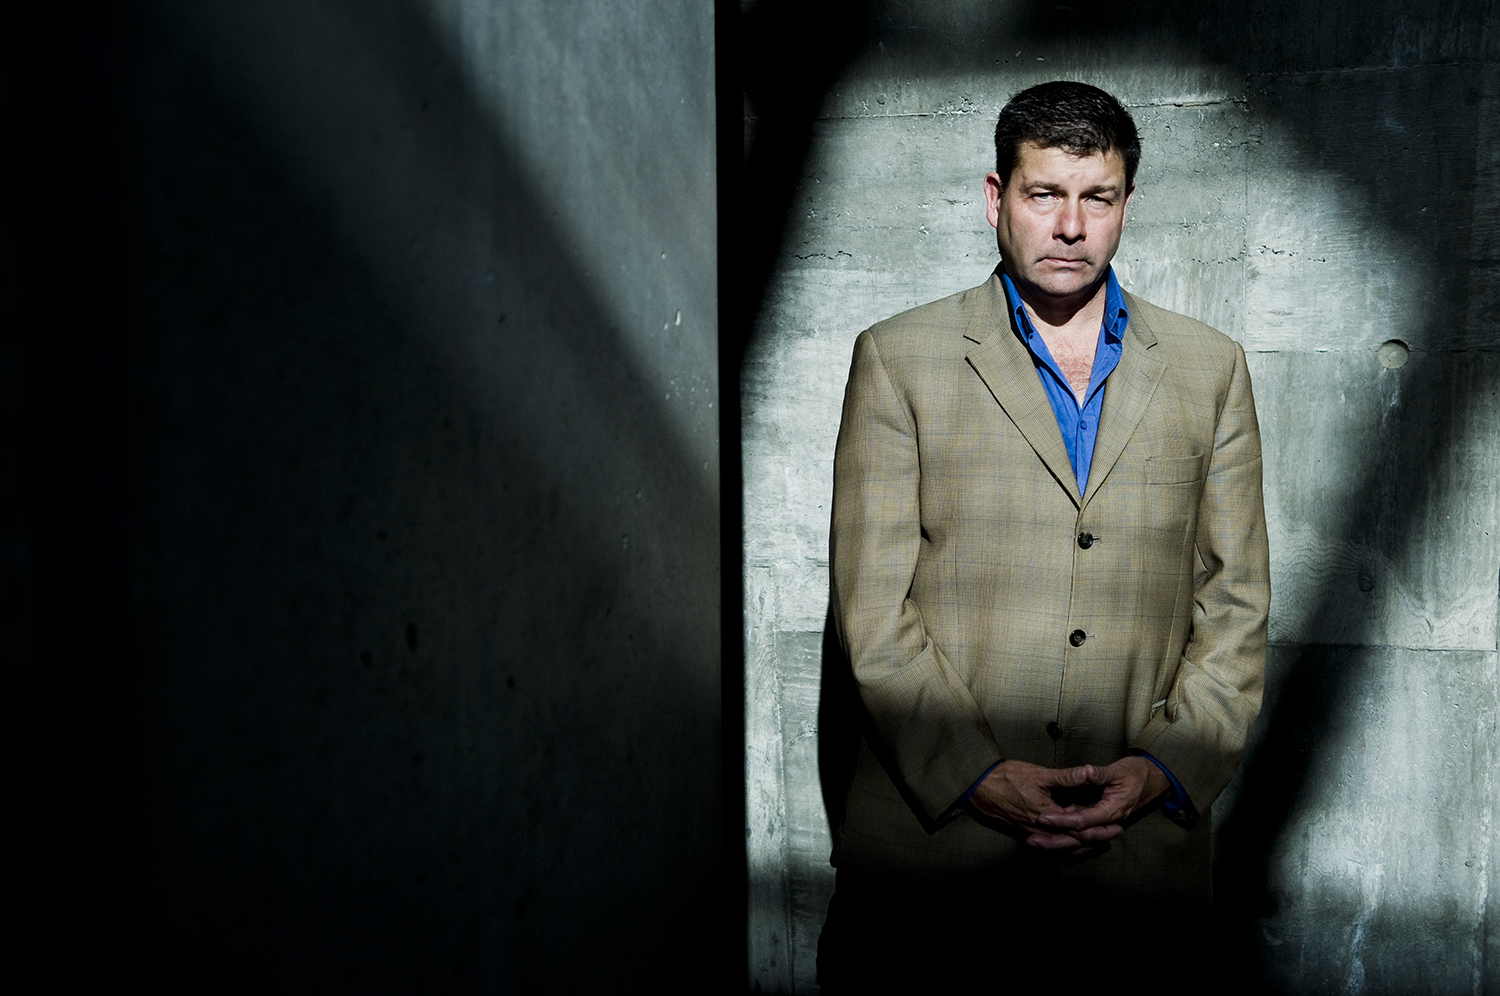  Canadian journalist Scott Taylor is photographed at War Museum in Ottawa. In 2004, while covering the conflict in Iraq, Taylor was kidnapped by Ansar Al-Islam and held captive for five days. 